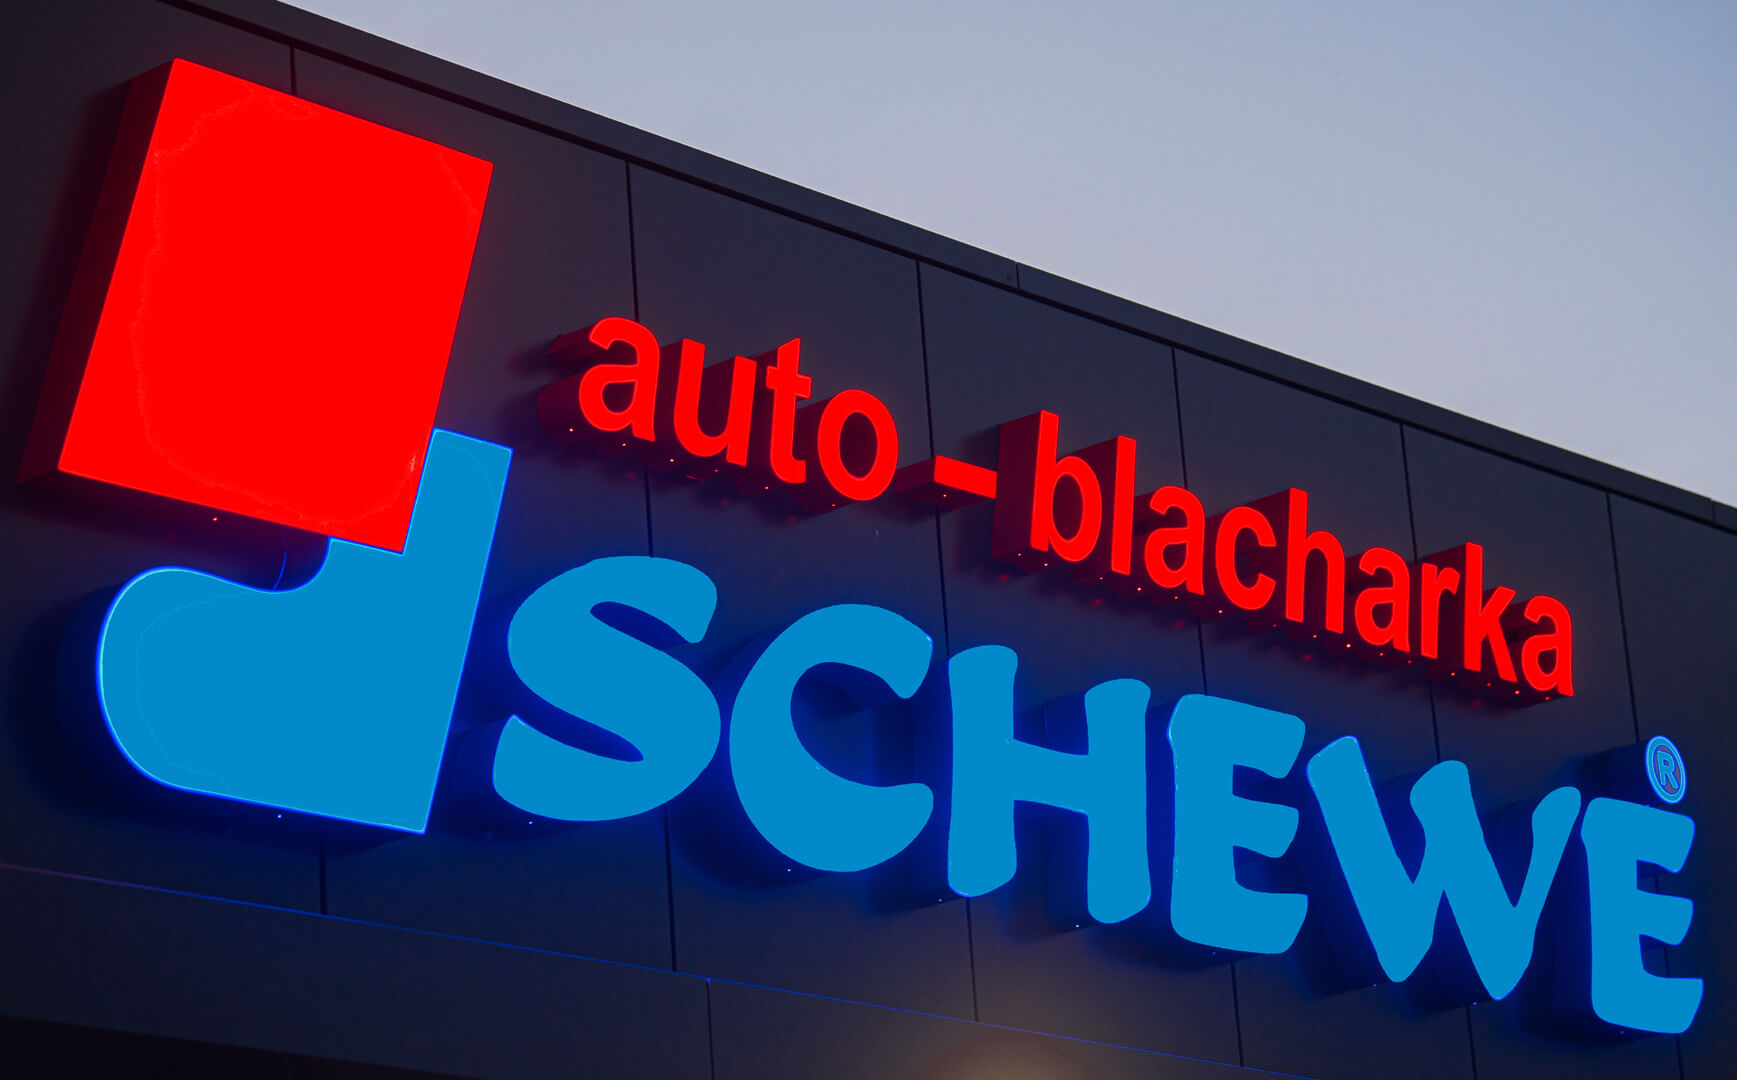 Auto blacharka Schewe - 3D LED letters, front and side lit from Plexiglas.